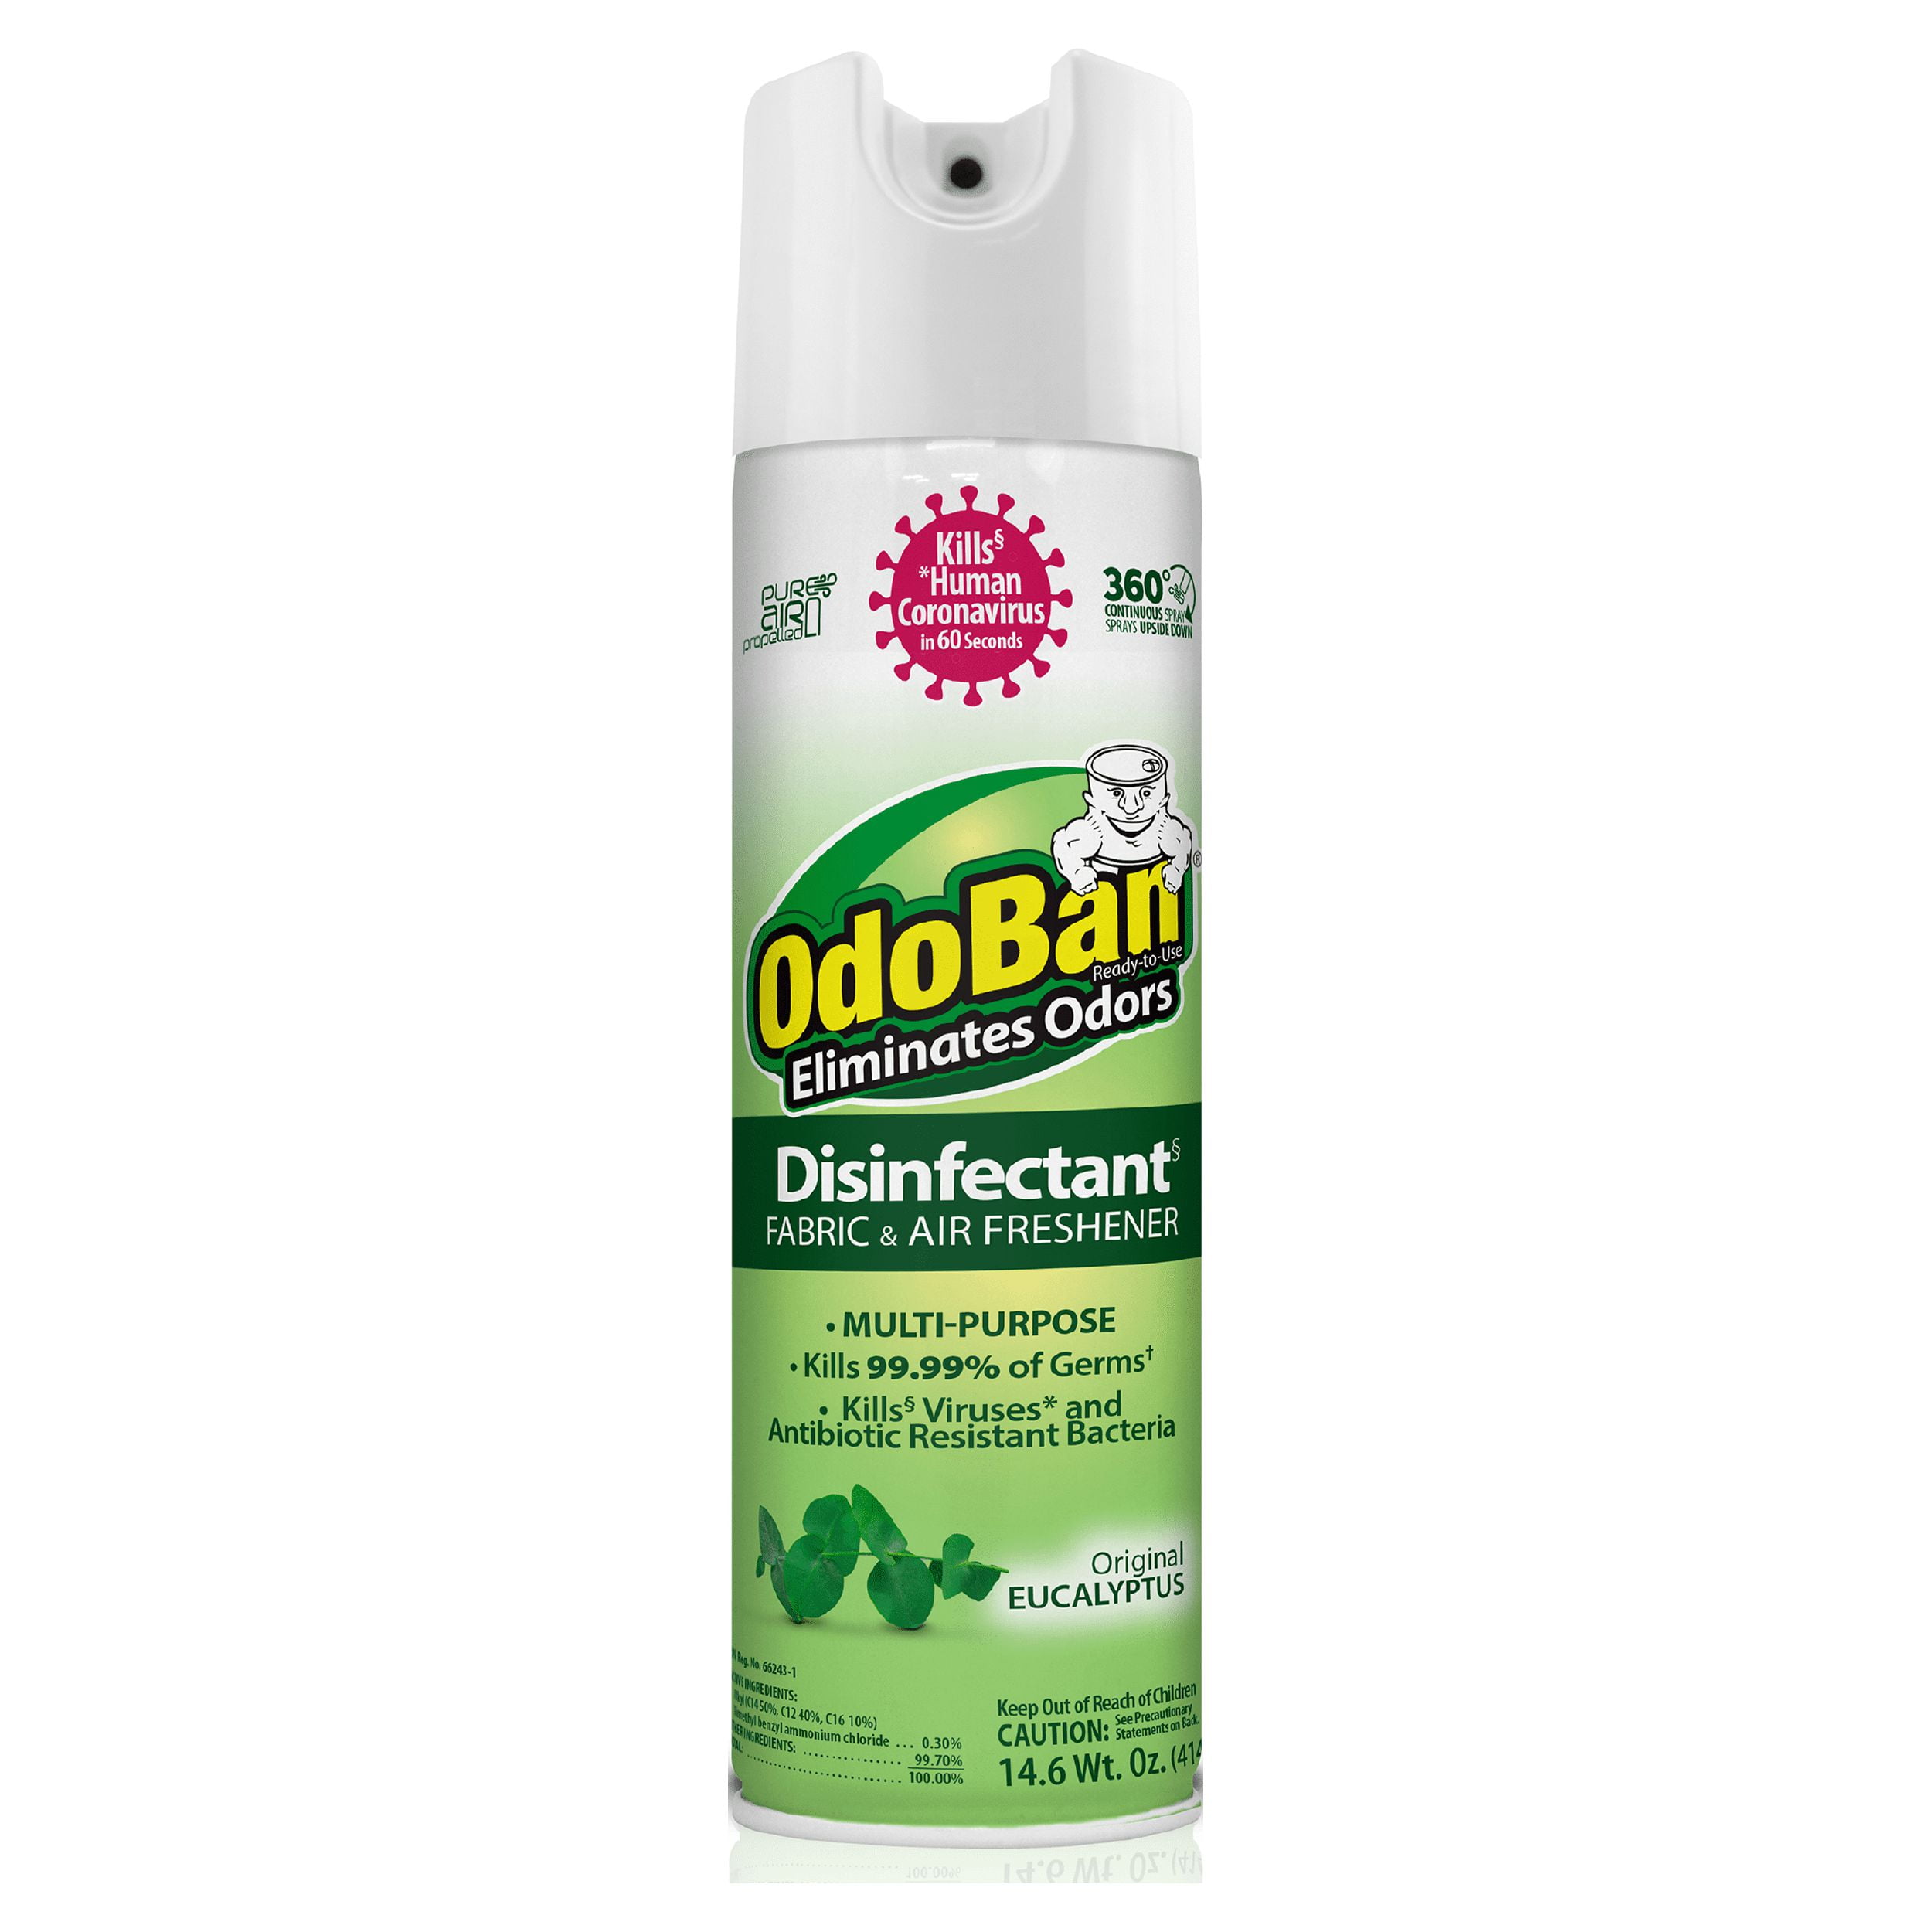 OdoBan 32 oz. Shower, Tub and Tile Cleaner, Powerful Foaming